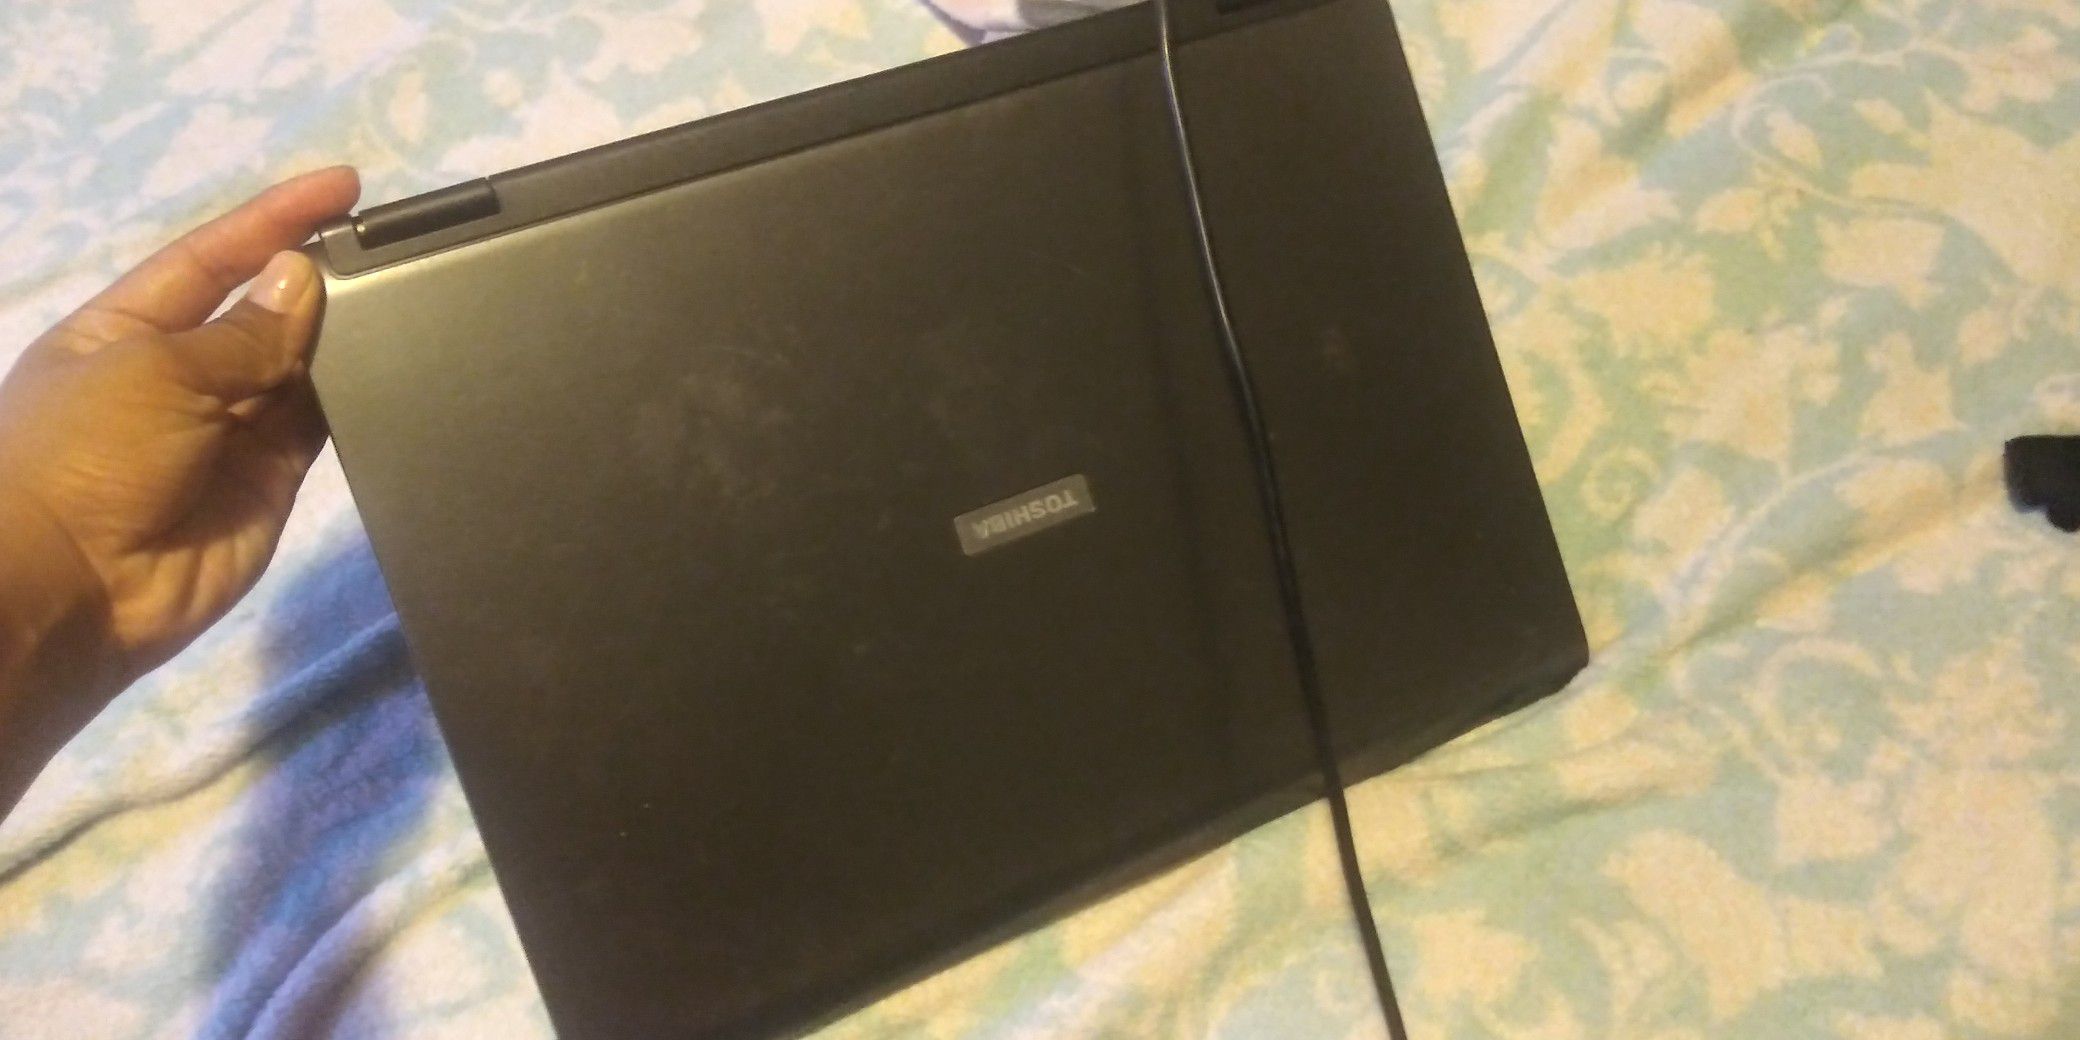 Laptop Toshiba for sale work perfect they just need nedd battery but turn on and everything no camera